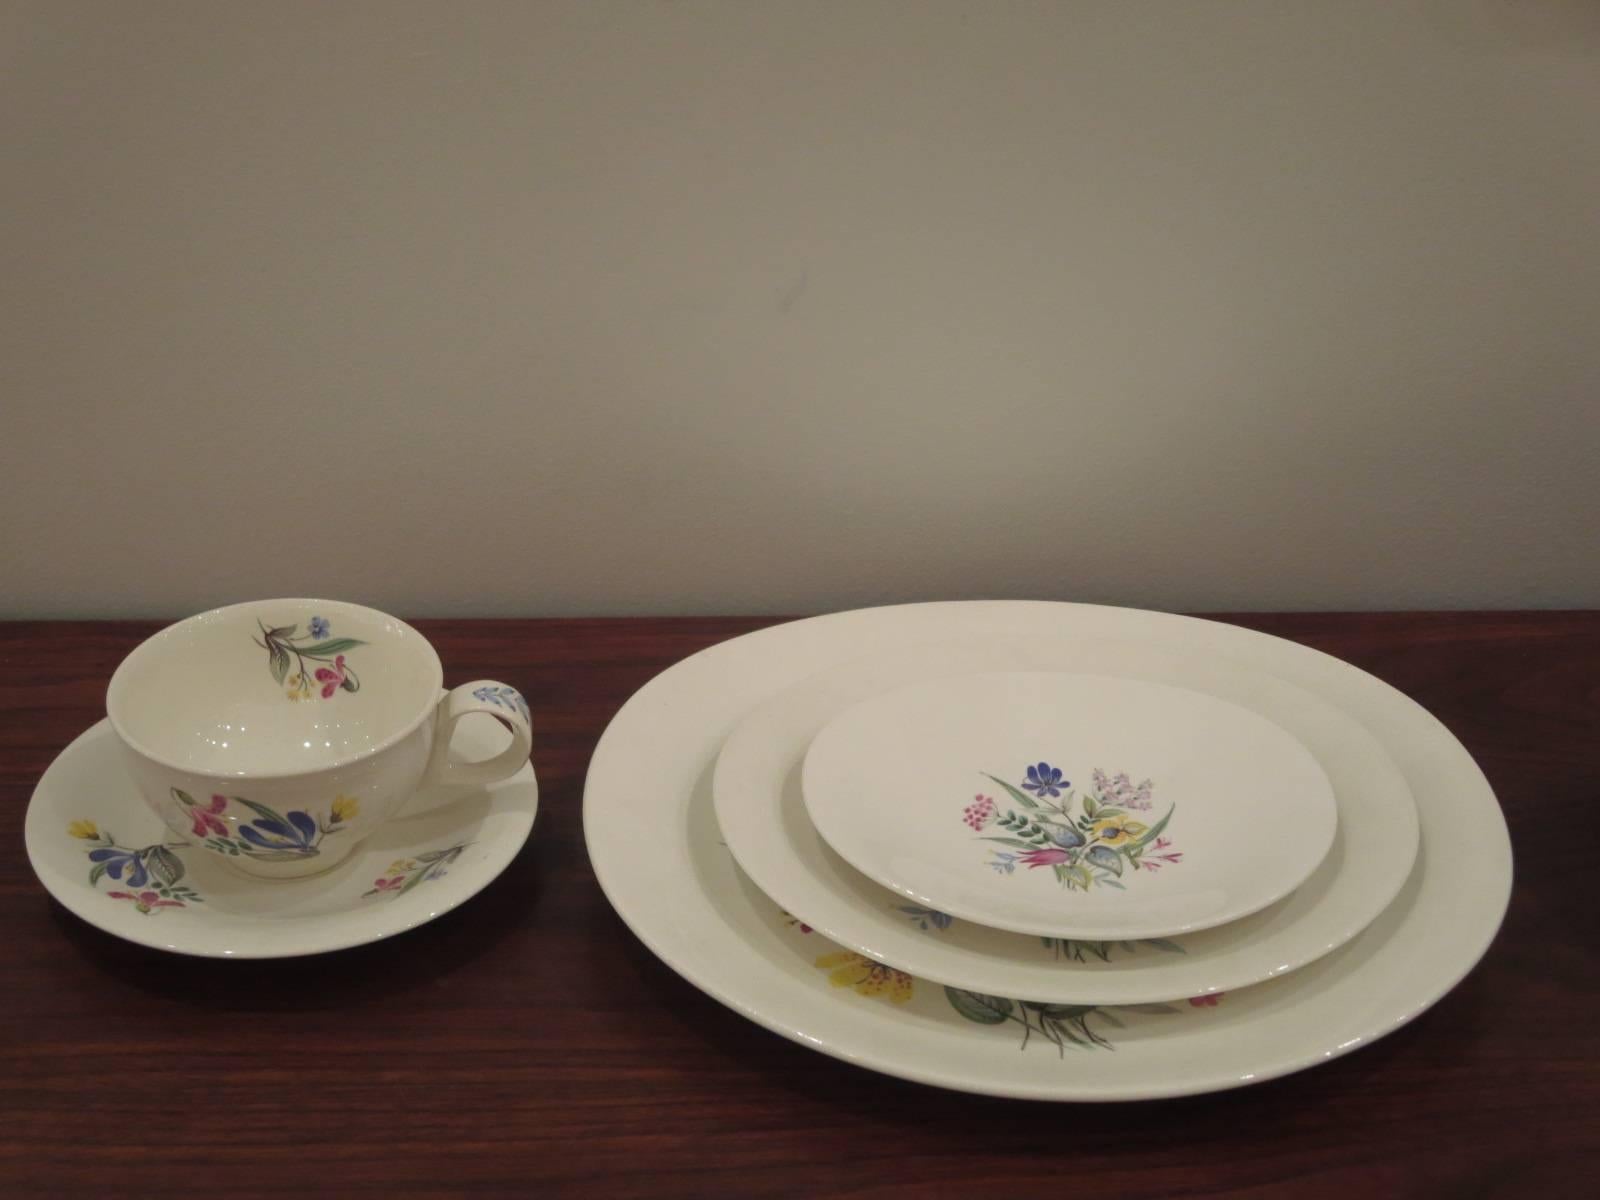 Eva Zeisel five pieces place setting for six: Hallcraft China Bouquet Pattern by Hall China .This set is in nice vintage condition; due to their use some of the flower patterns present some light scratches.